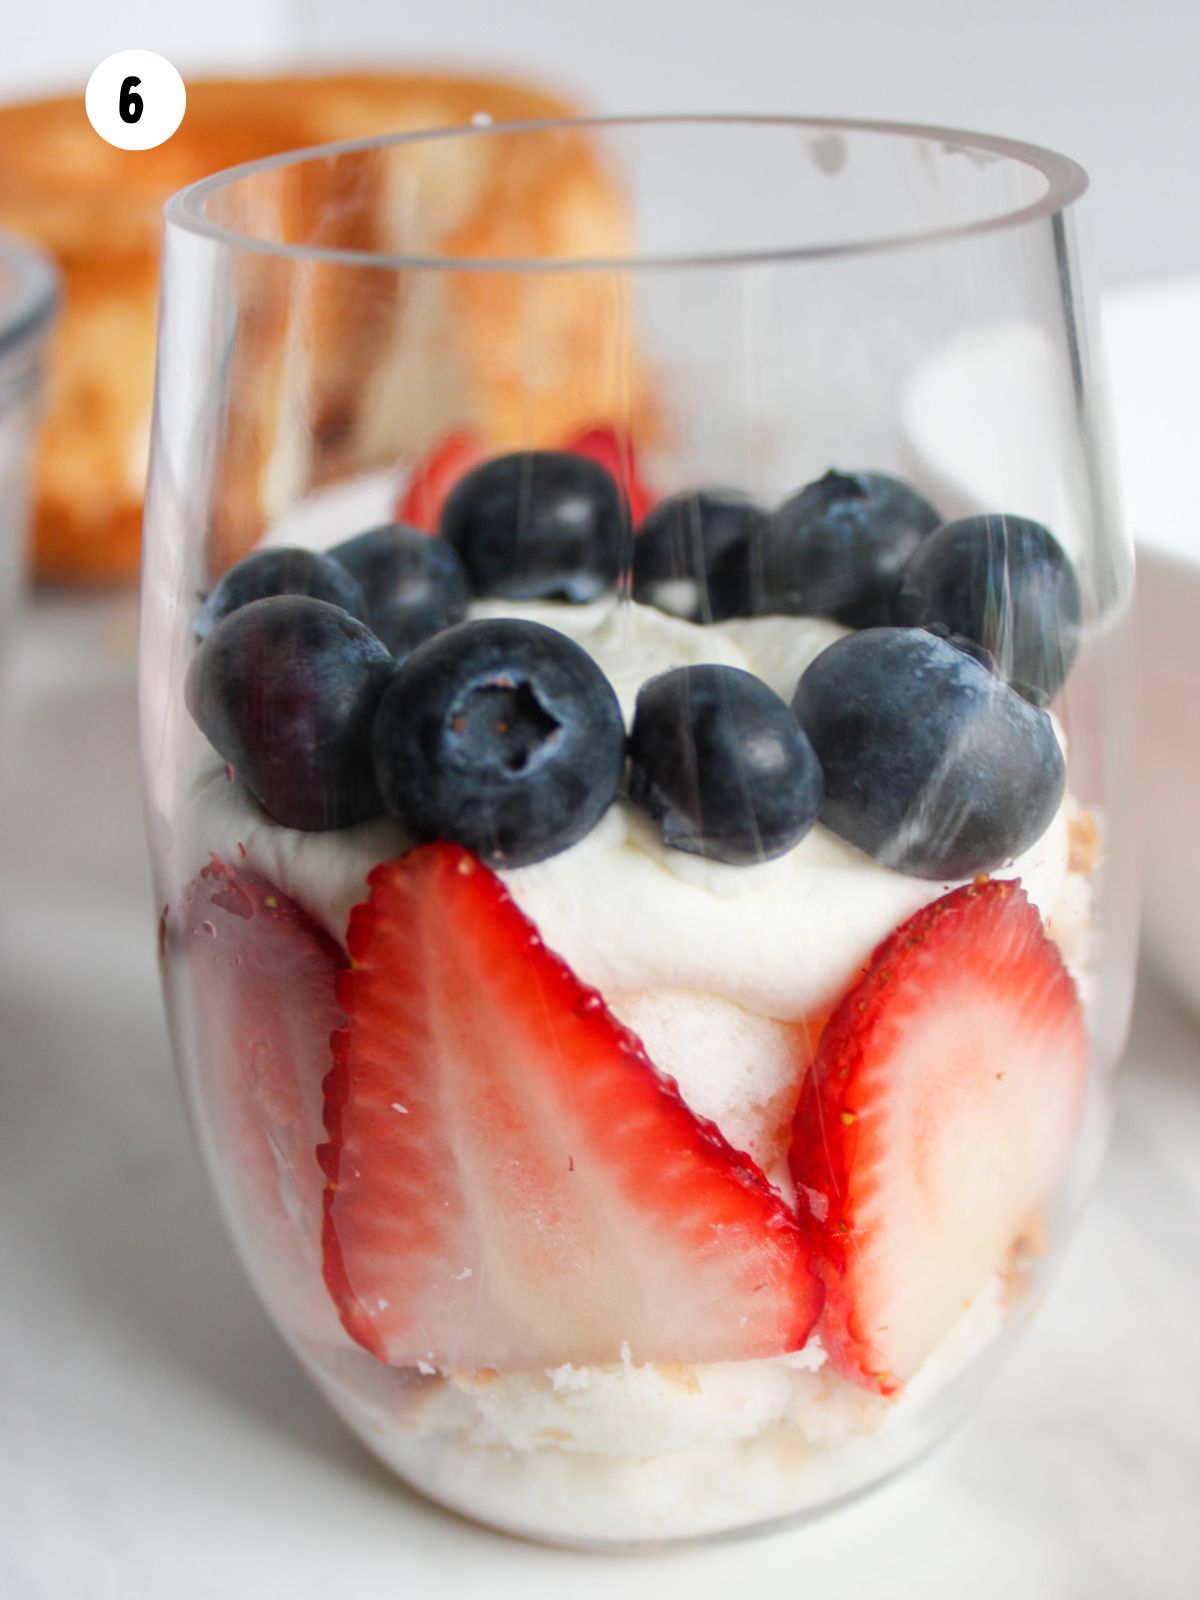 blueberries on top of whipped cream and strawberries.